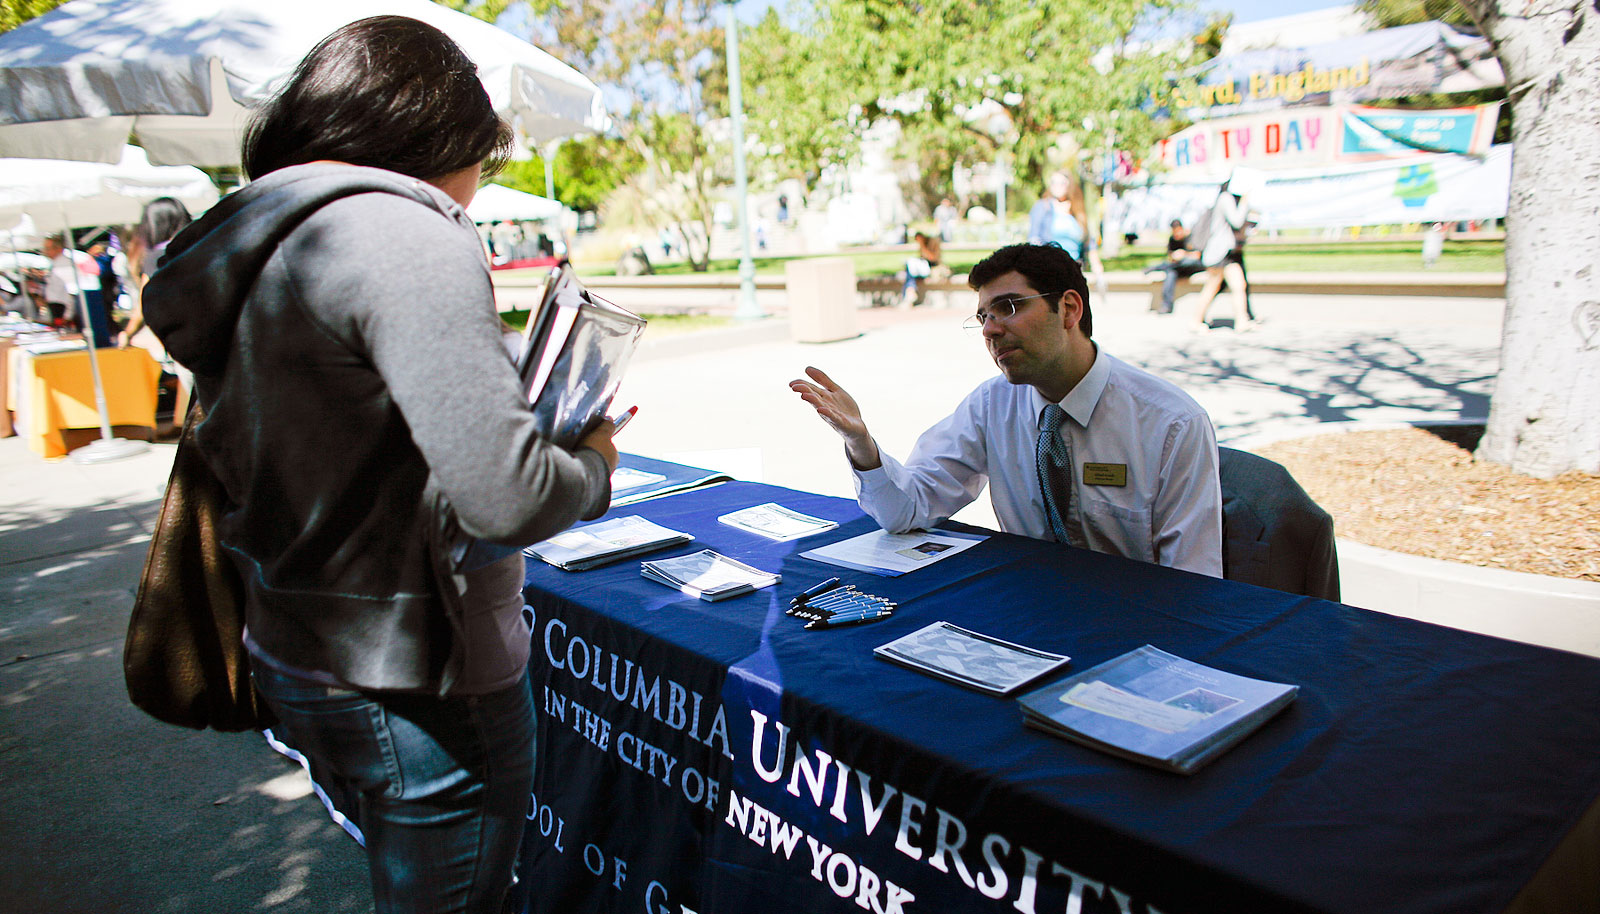 A student speaks with a representative from Columbia University.